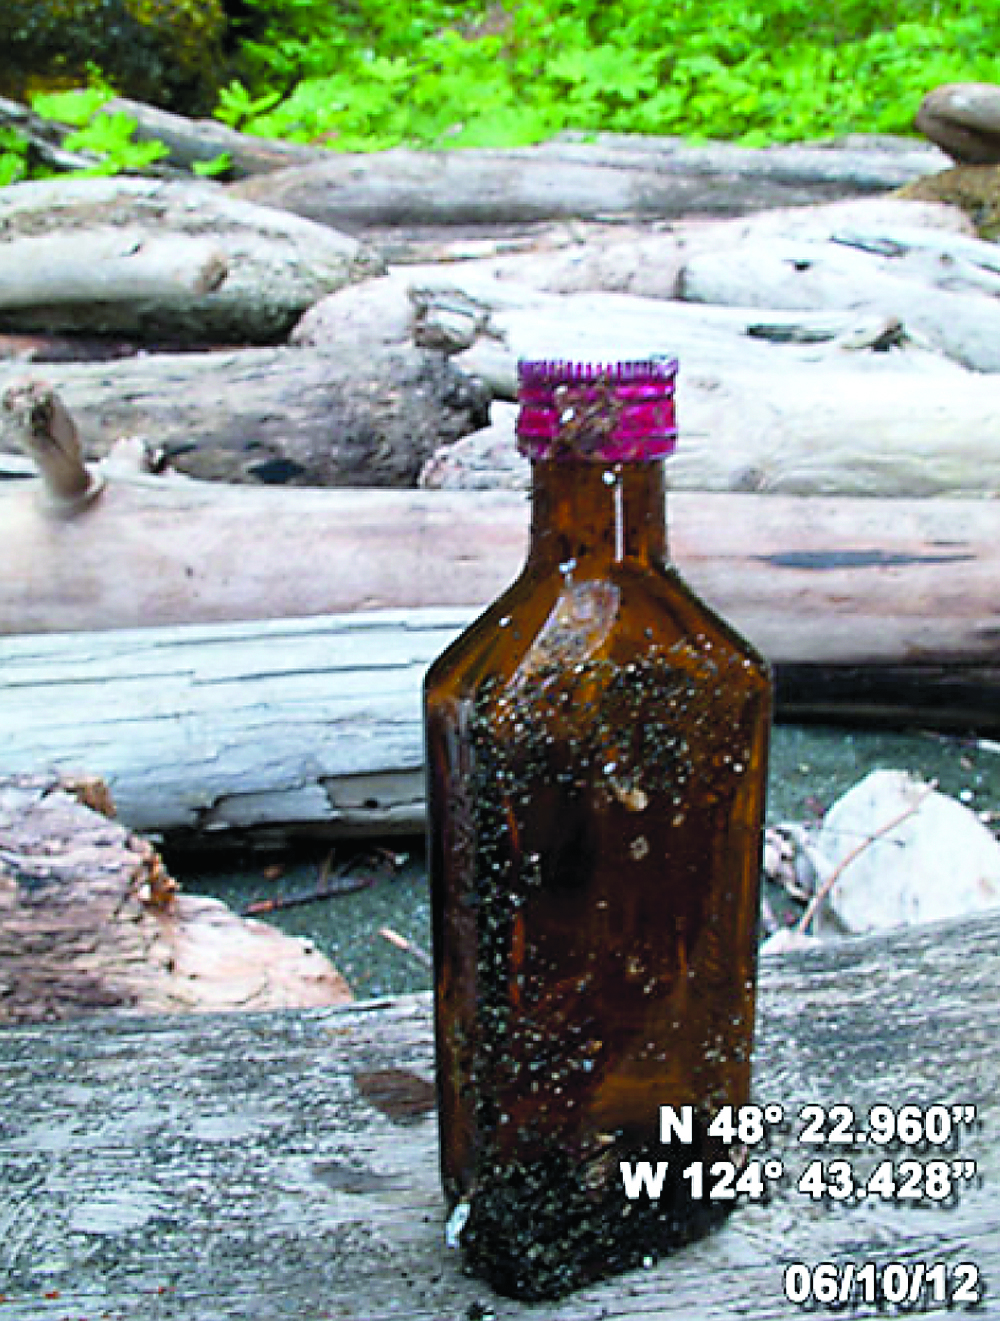 A capped bottle is part of the flotsam found on Cape B beach just south of Cape Flattery.